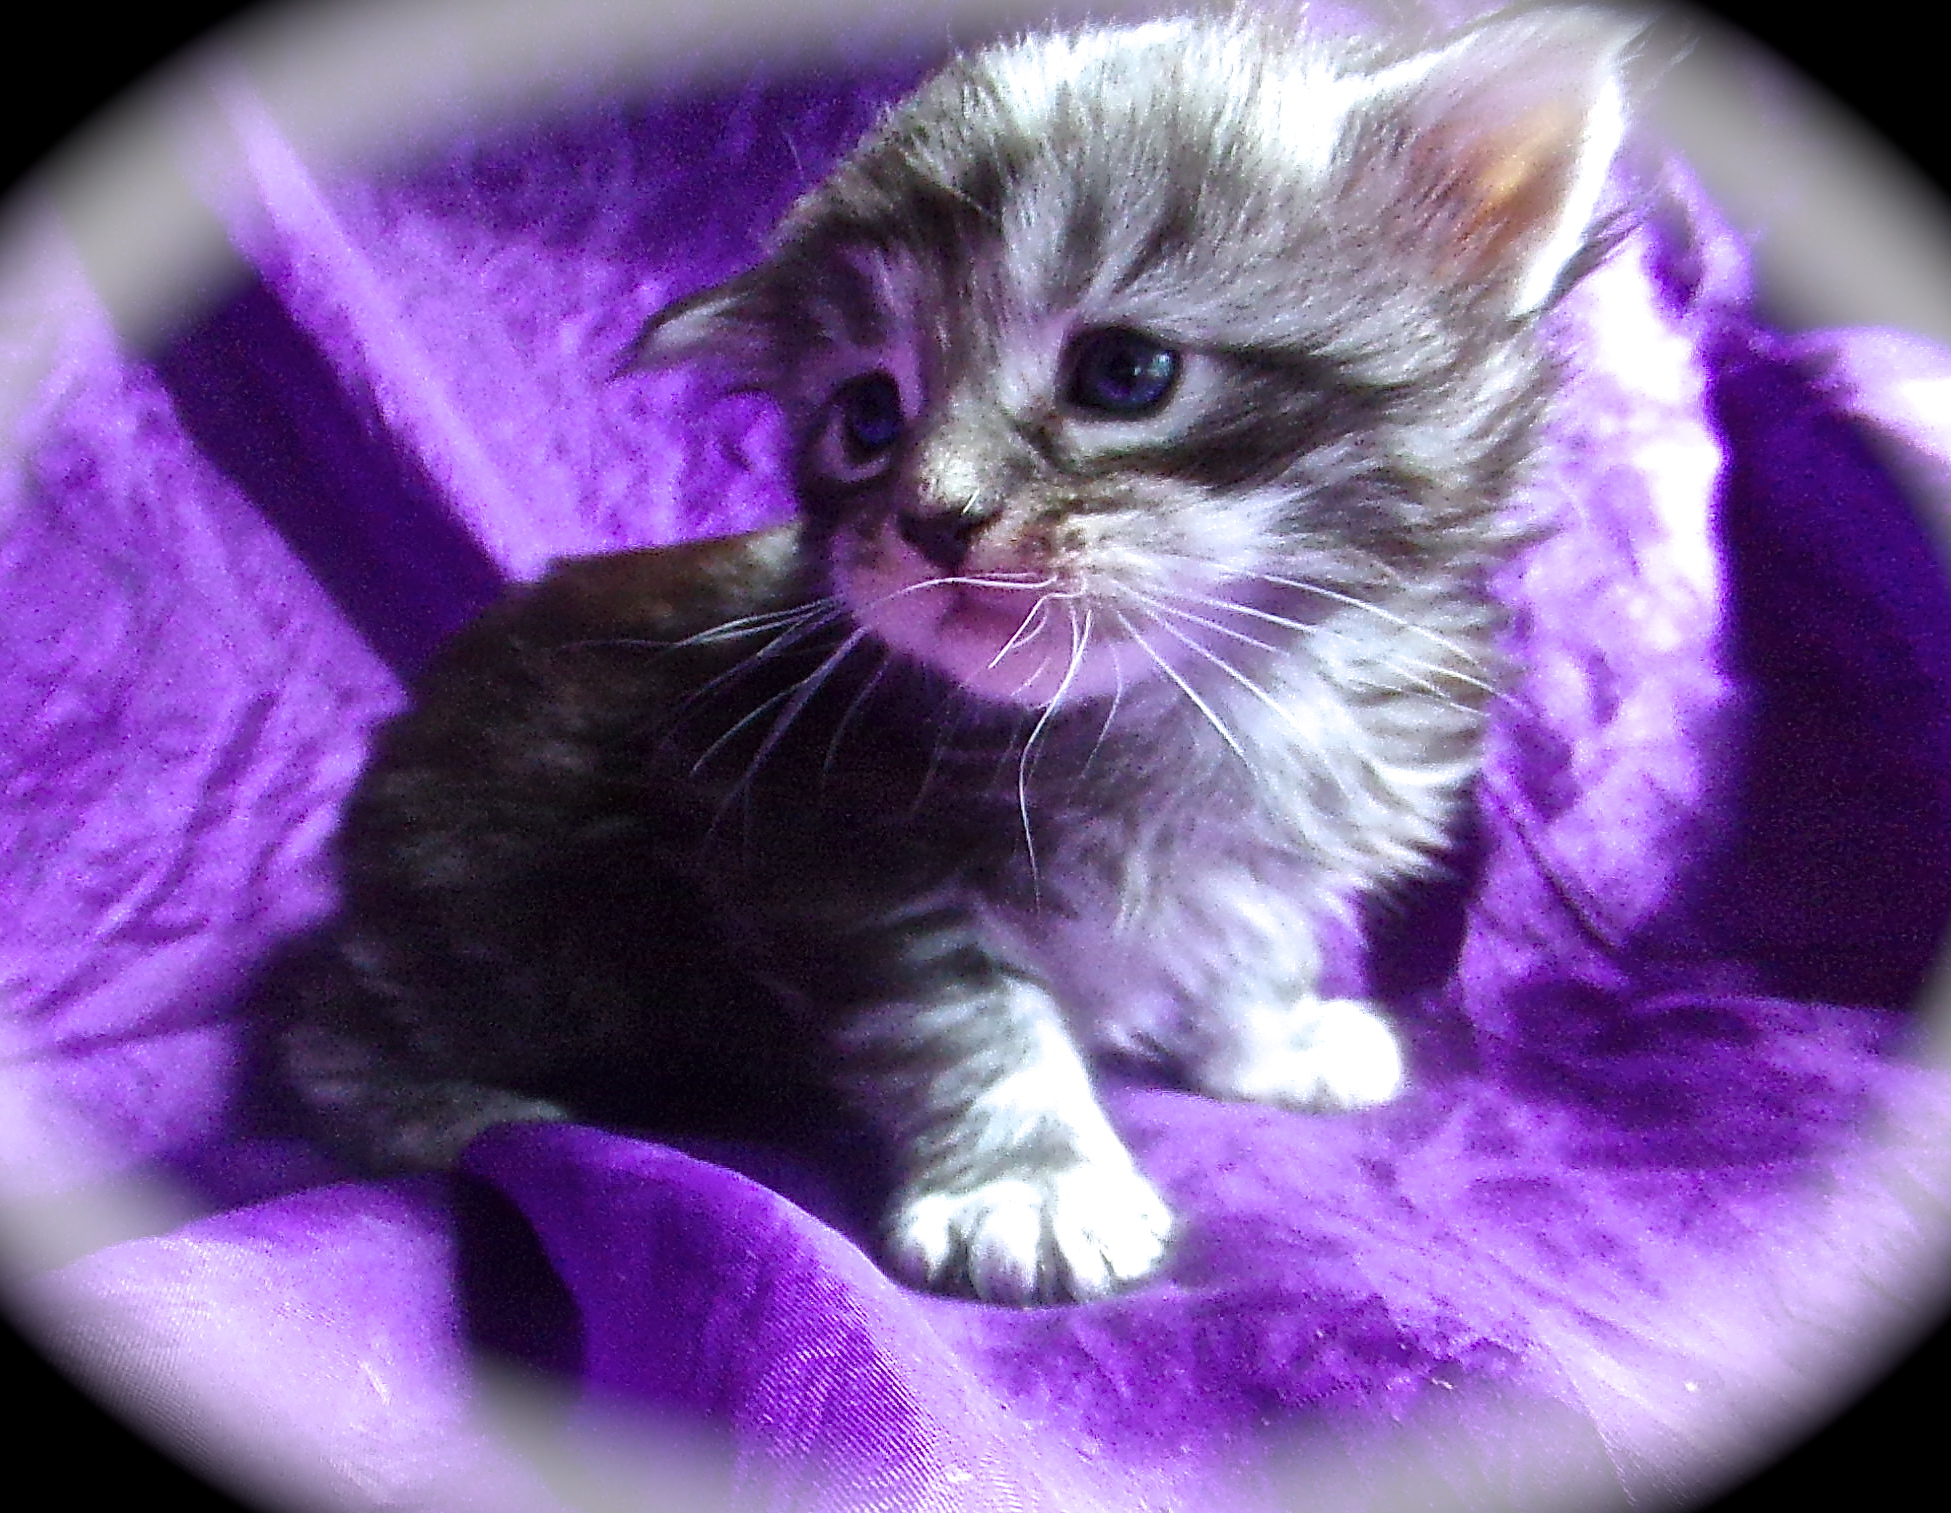 Femelle Maine Coon Robe Black silver blotched tabby Yeux vert à or Non polydactile